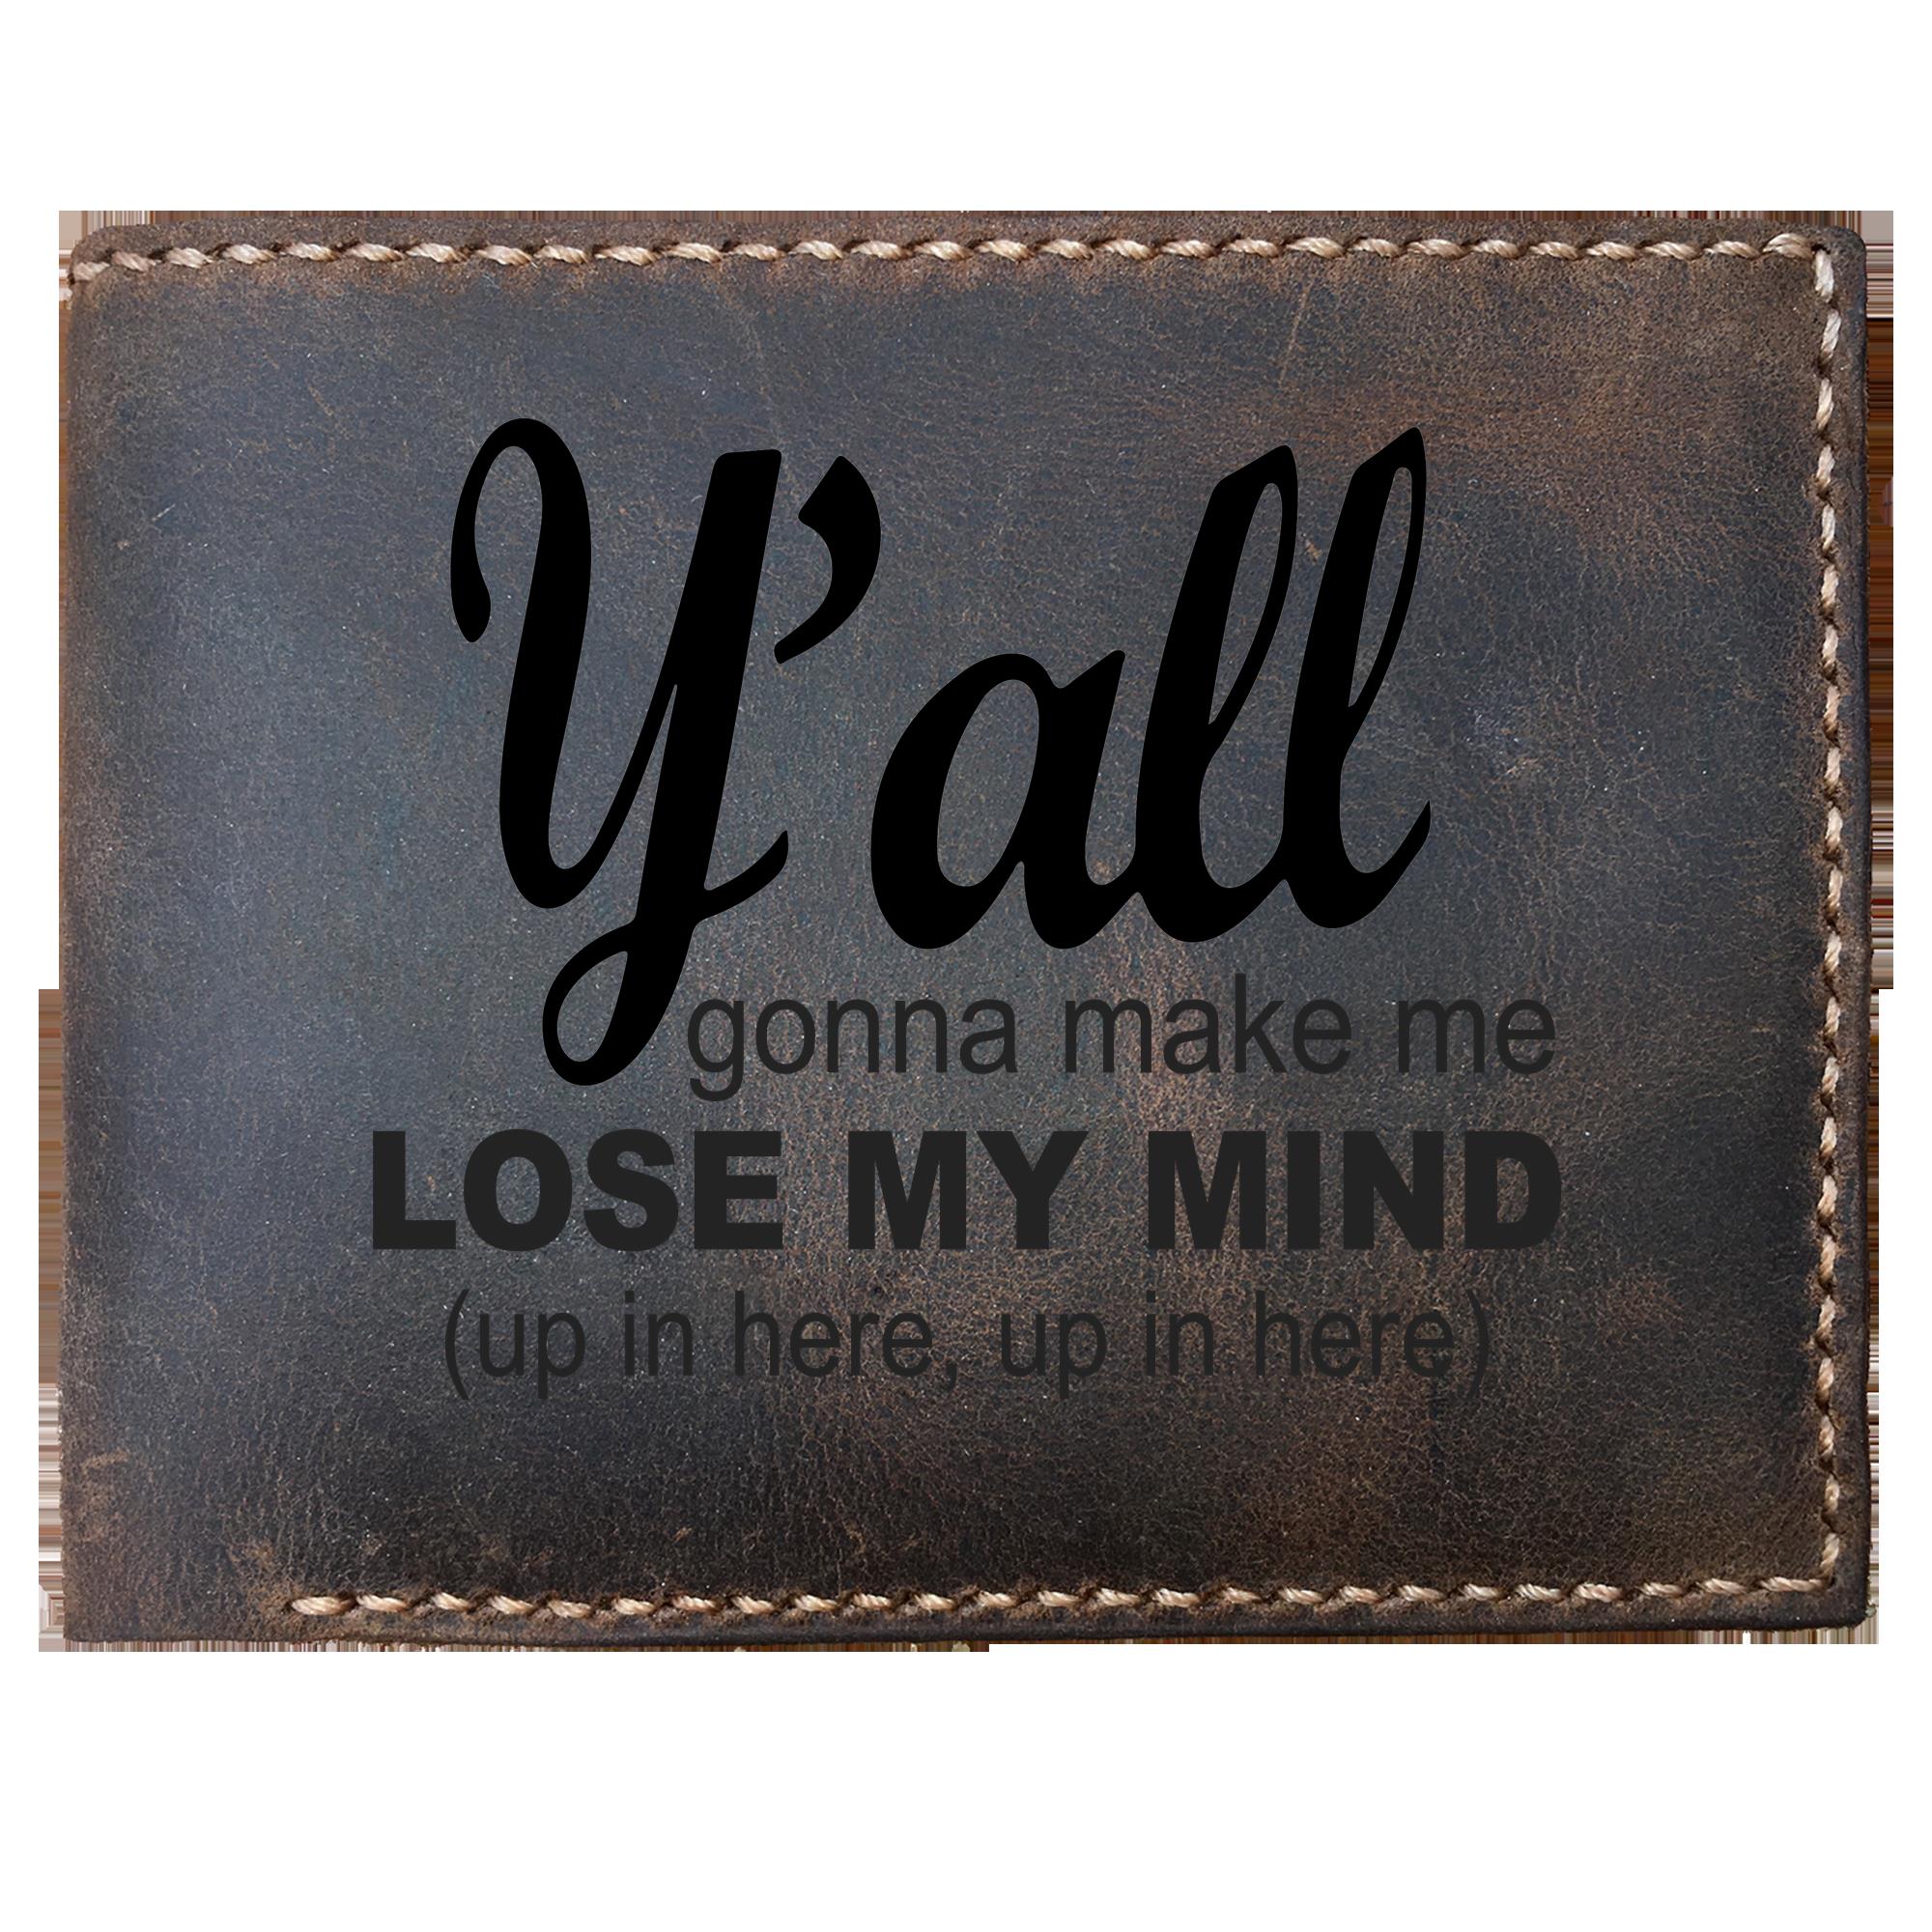 Skitongifts Funny Custom Laser Engraved Bifold Leather Wallet For Men, Y_All Gonna Make Me Lose My Mind